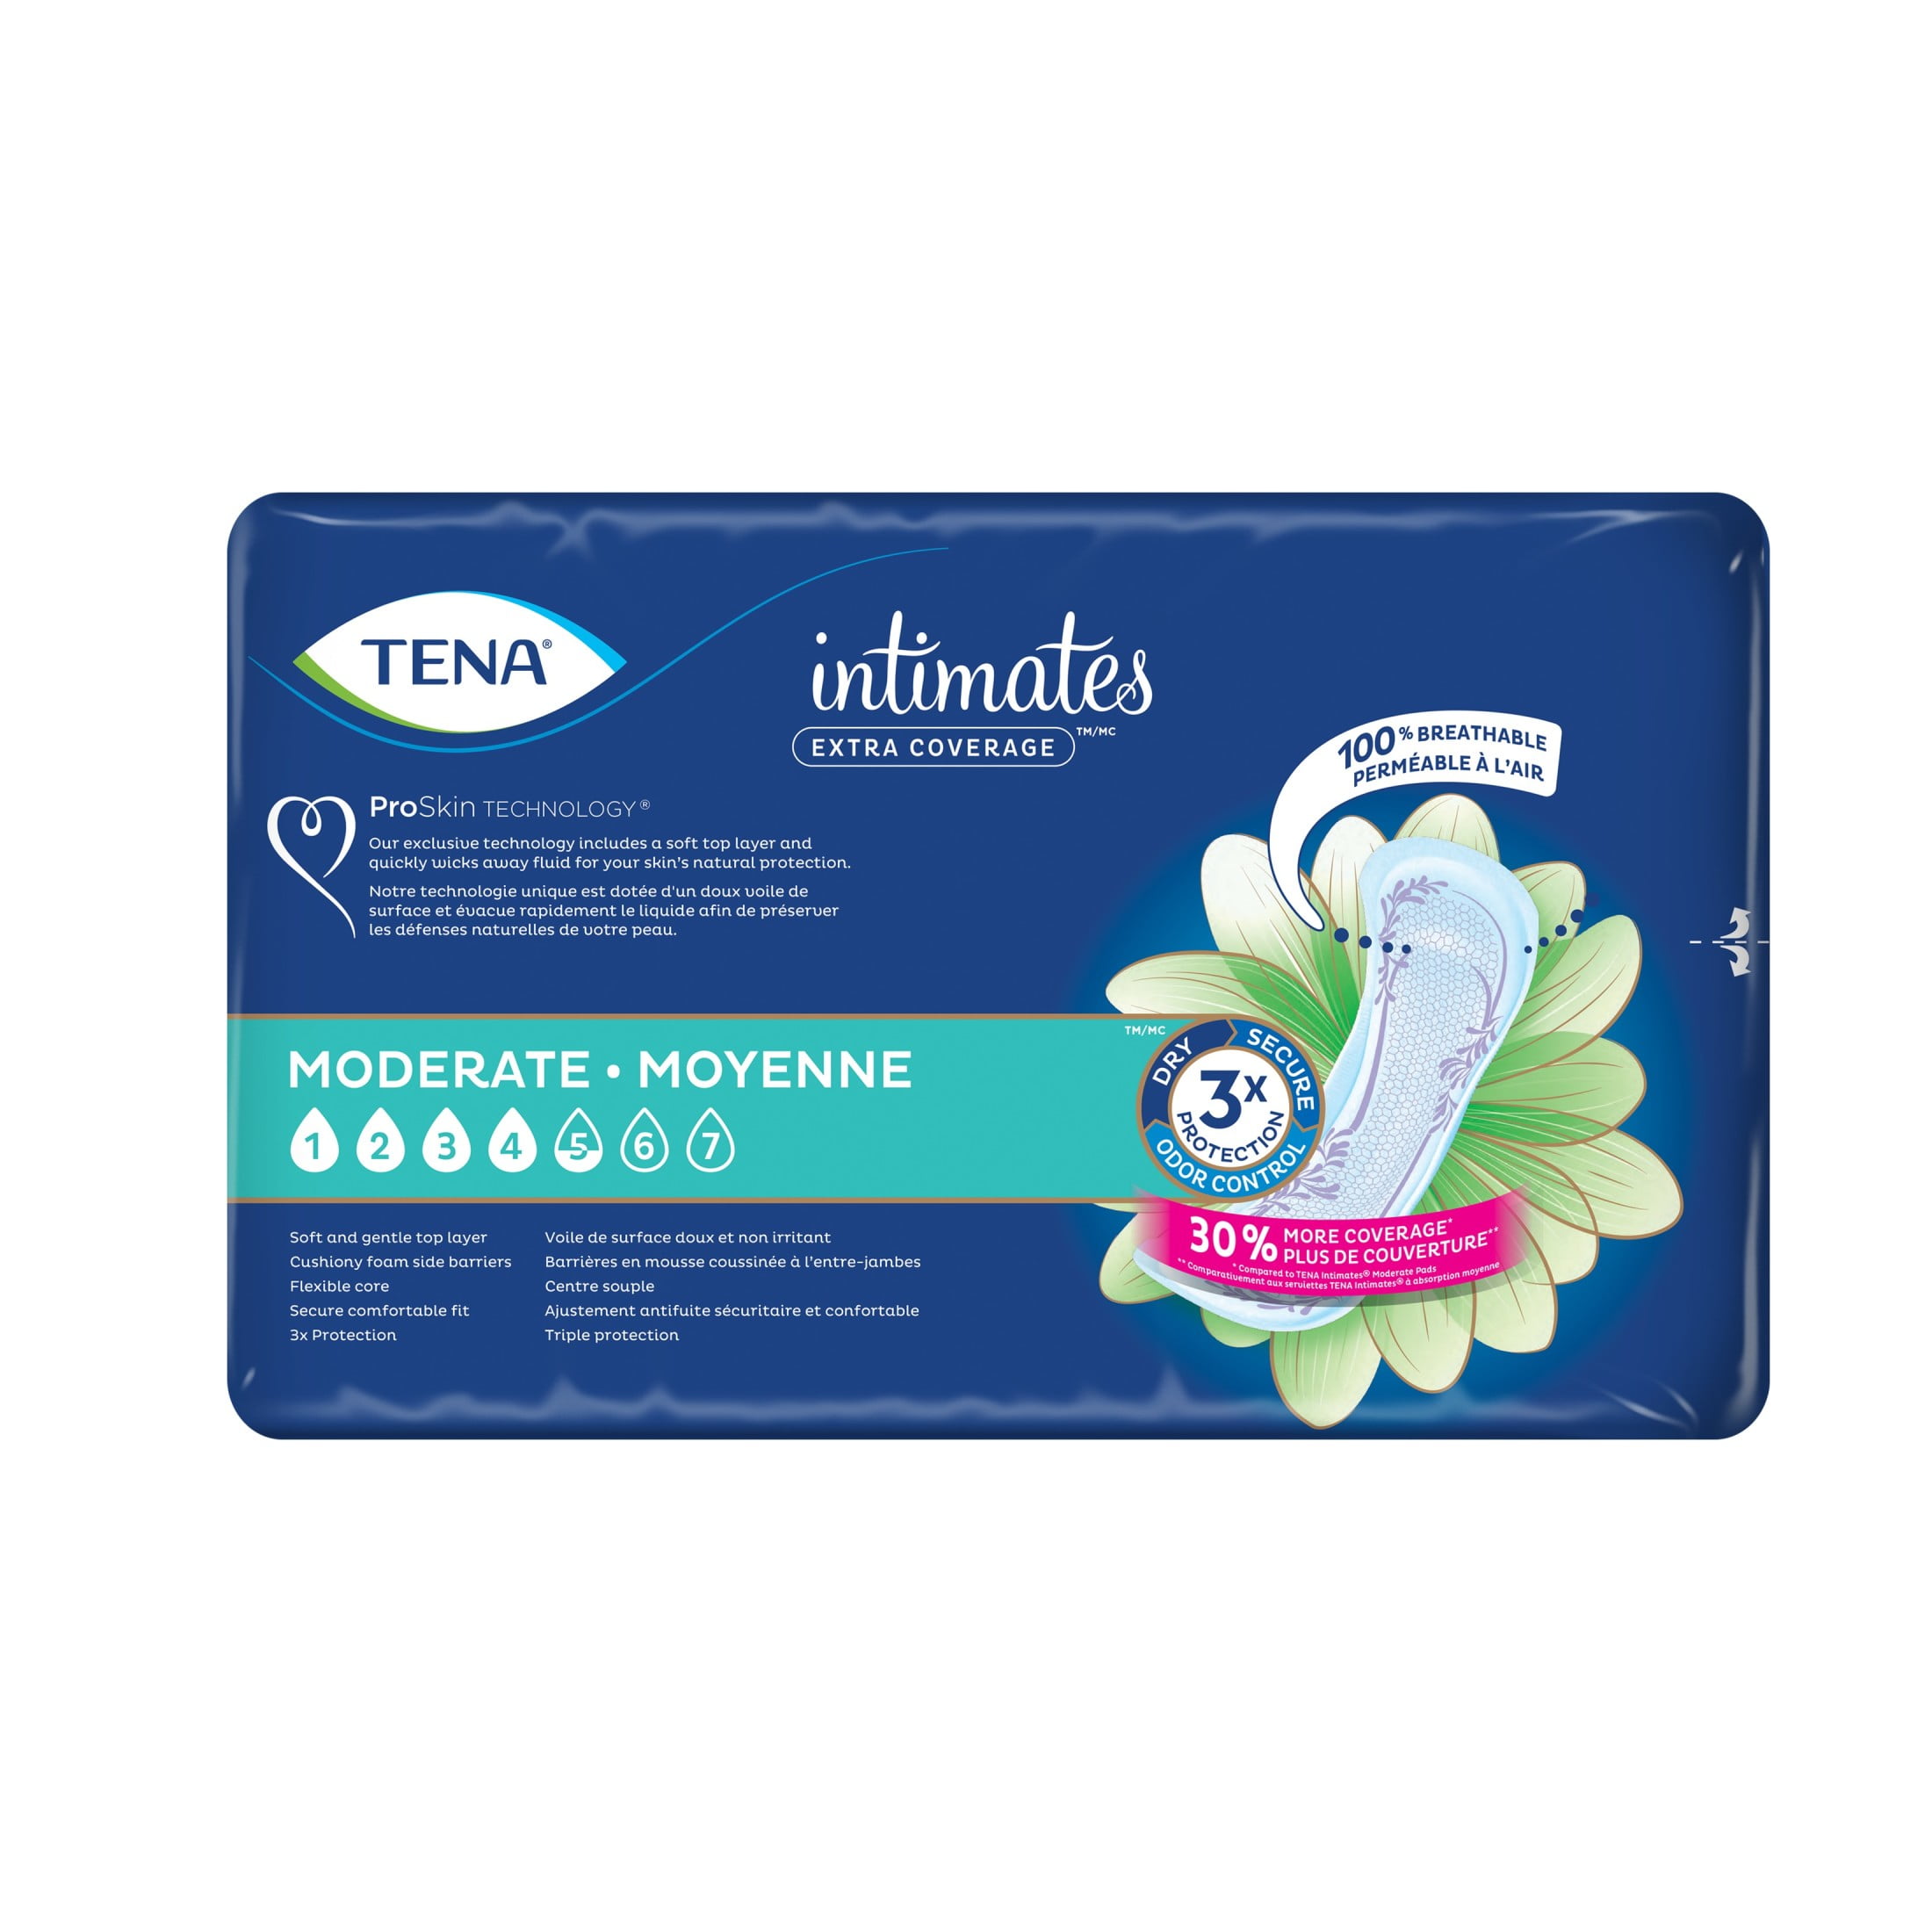 Tena Intimates Extra Coverage Moderate Pads, 60 Ct 